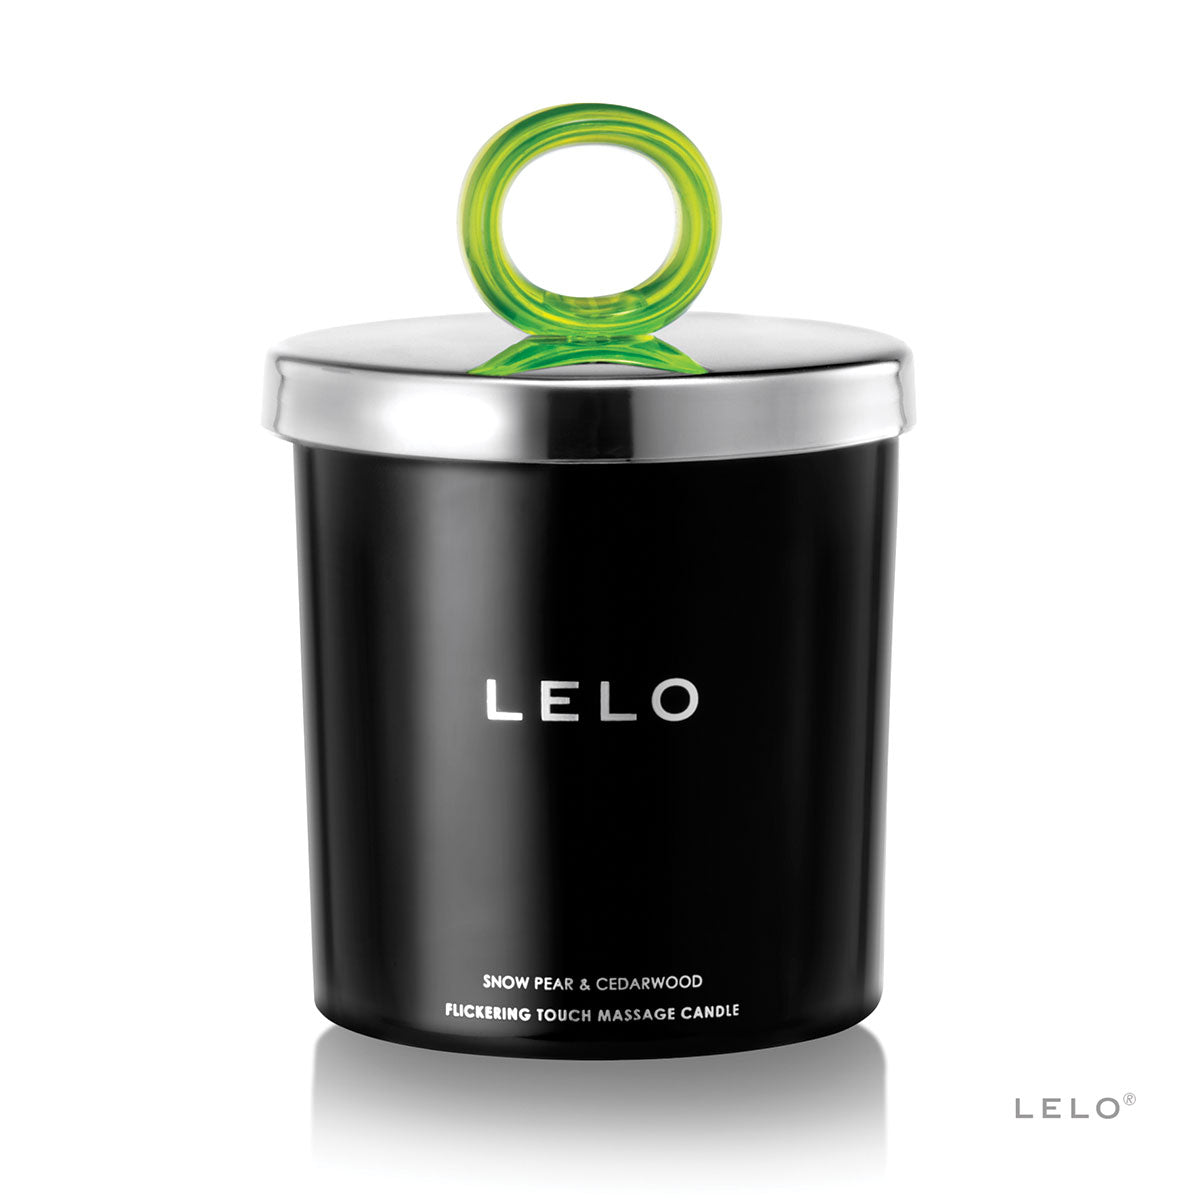 LELO Lubes & Enhancements LELO Flickering Touch Massage Candle - Snow Pear & Cedarwood